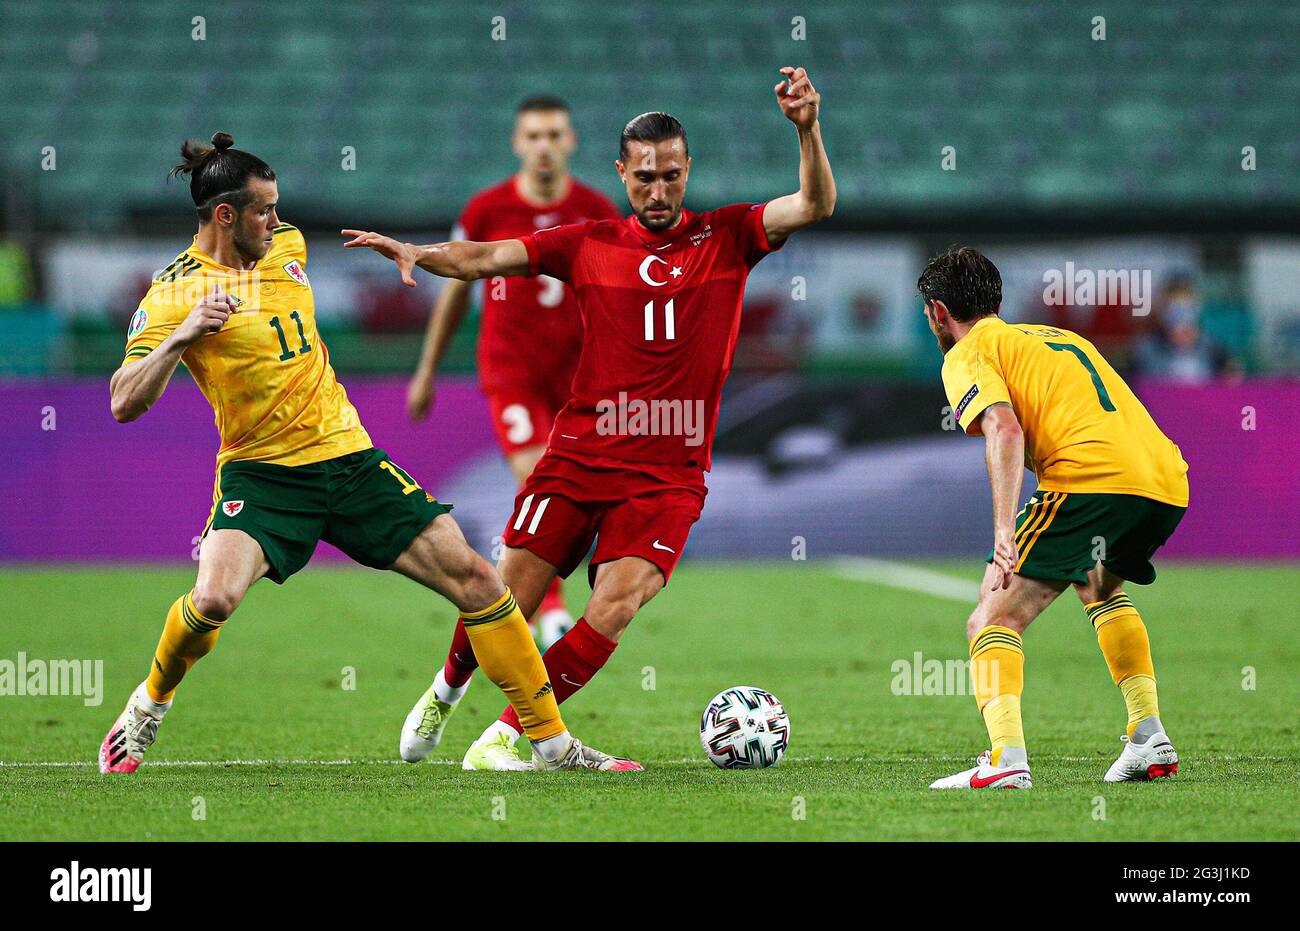 Yusuf Yazici of Turkey fighting for the ball with Gareth Bale of Wales during the UEFA Euro 2020 Group A match at the Baku Olympic Stadium in Azerbaijan. Picture date: Wednesday June 16, 2021. Stock Photo